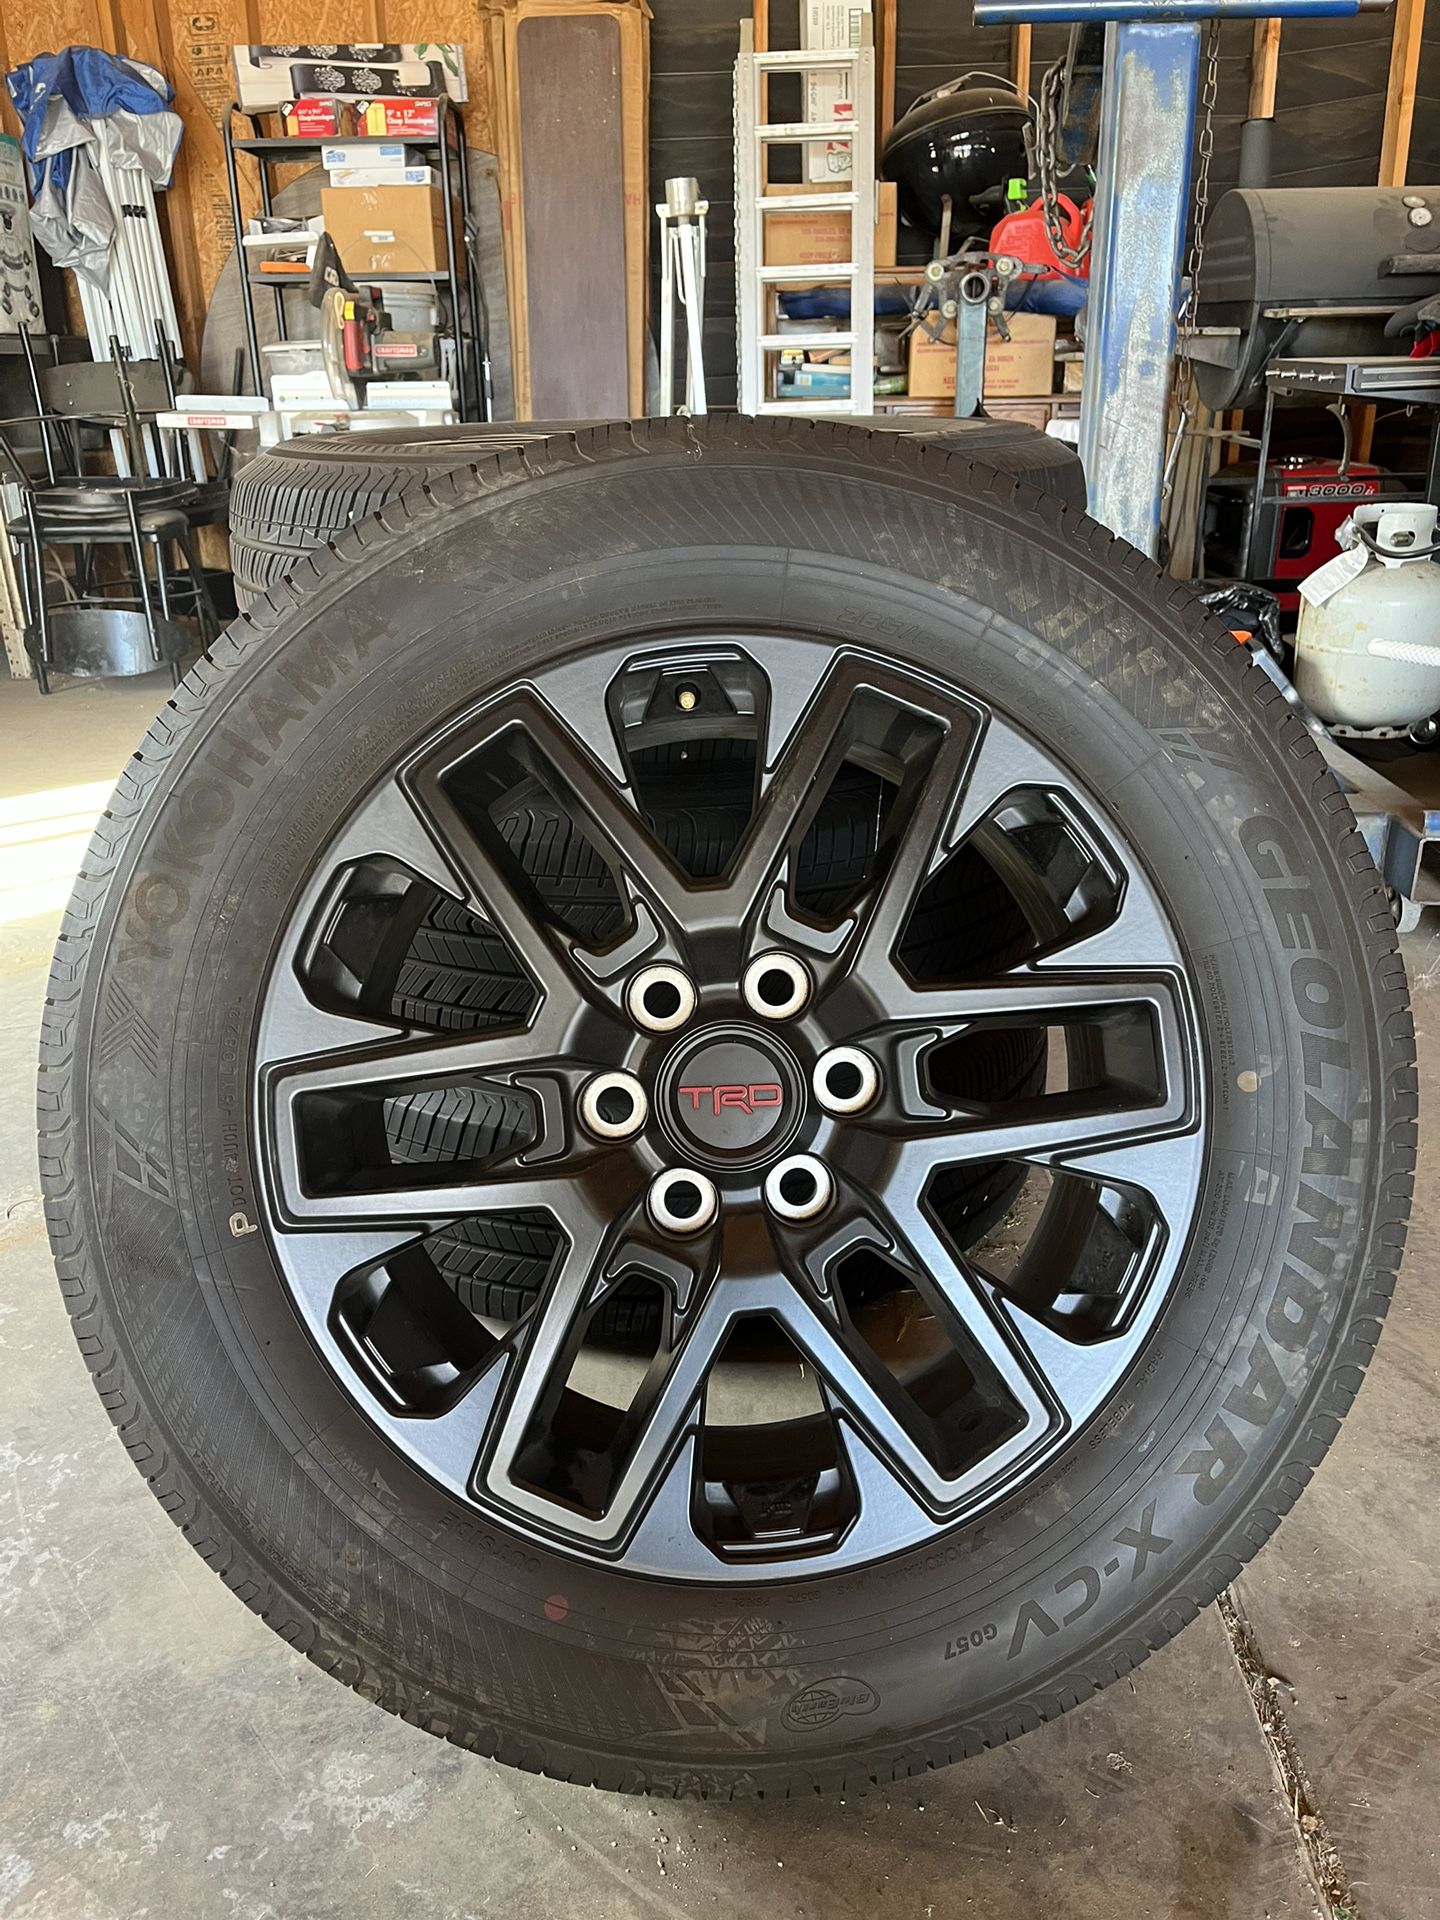 Toyota TRD 20” Wheels and Tires